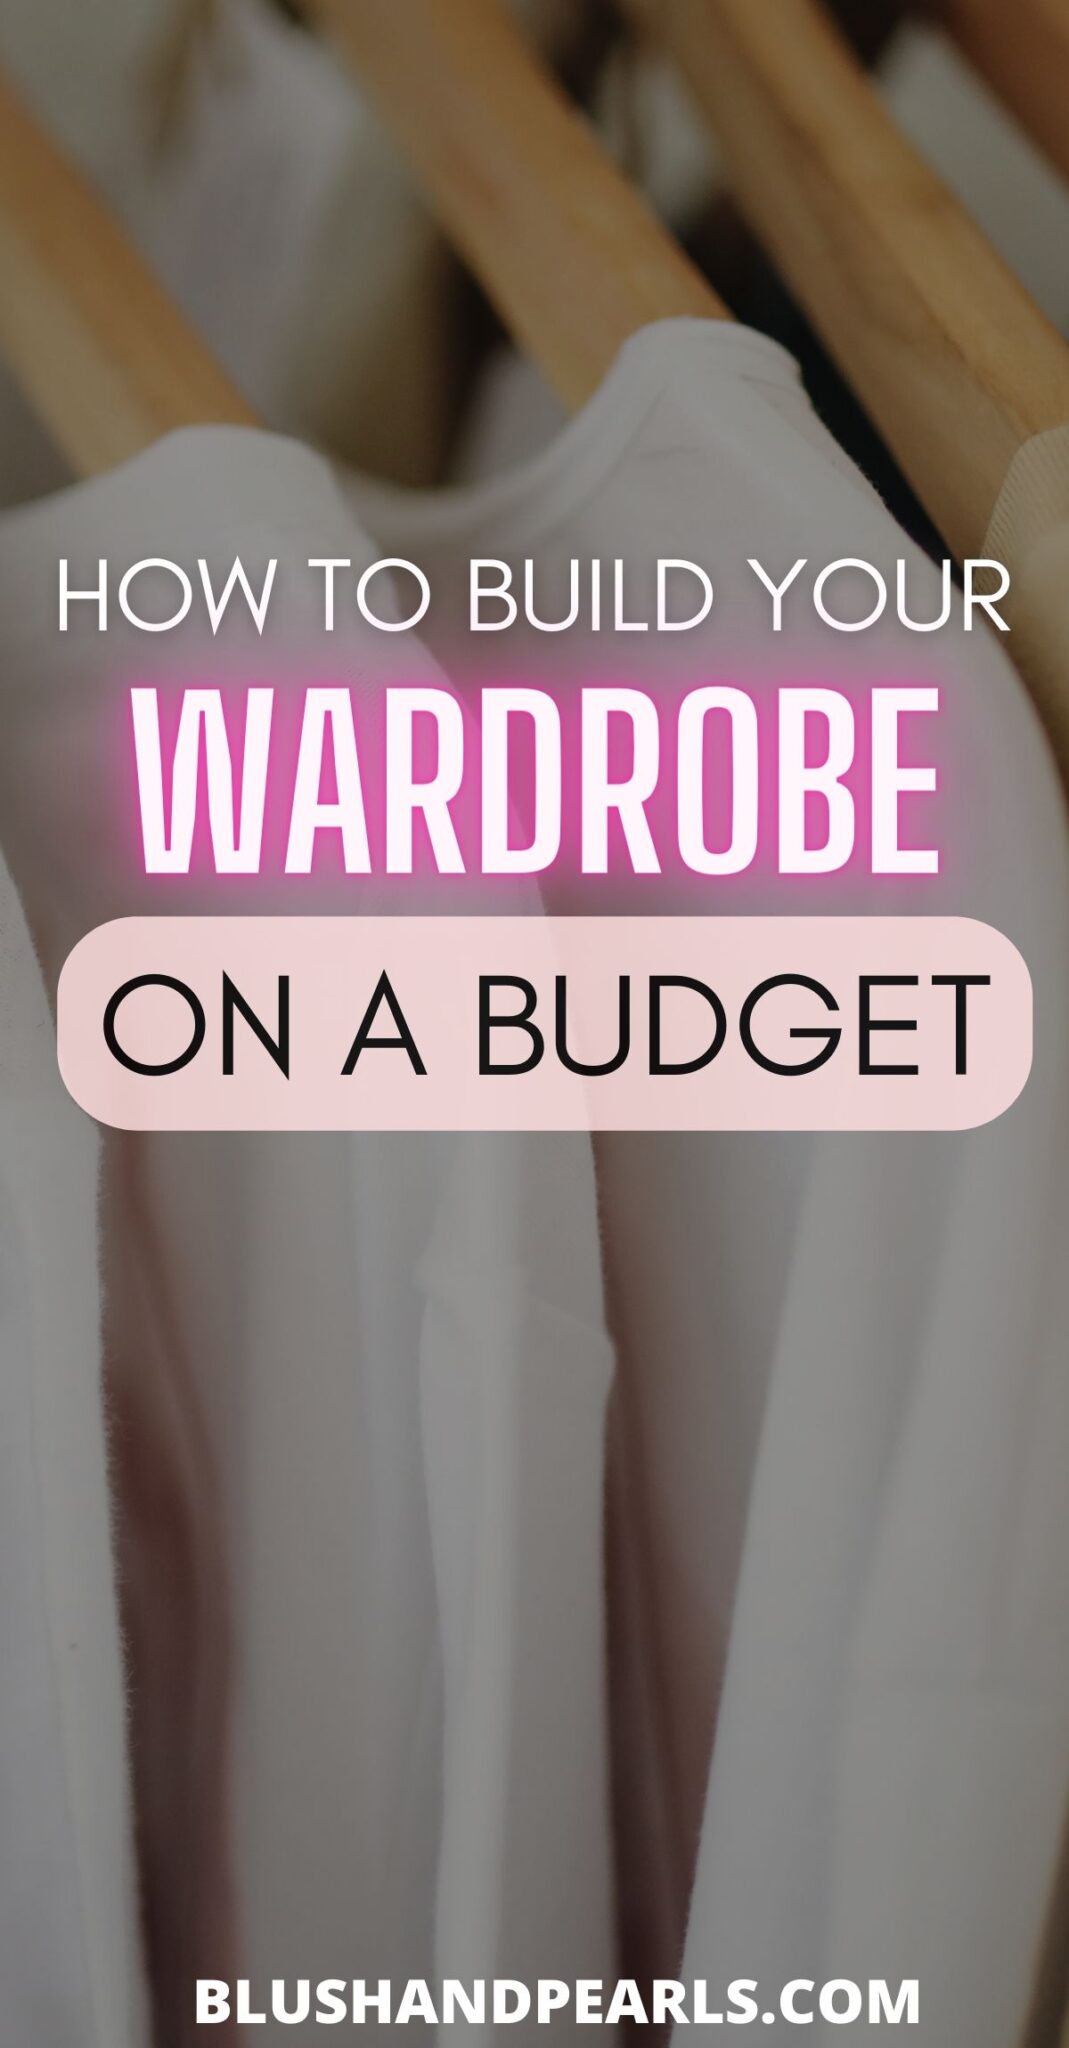 9 Ways to Build Your Wardrobe On A Budget